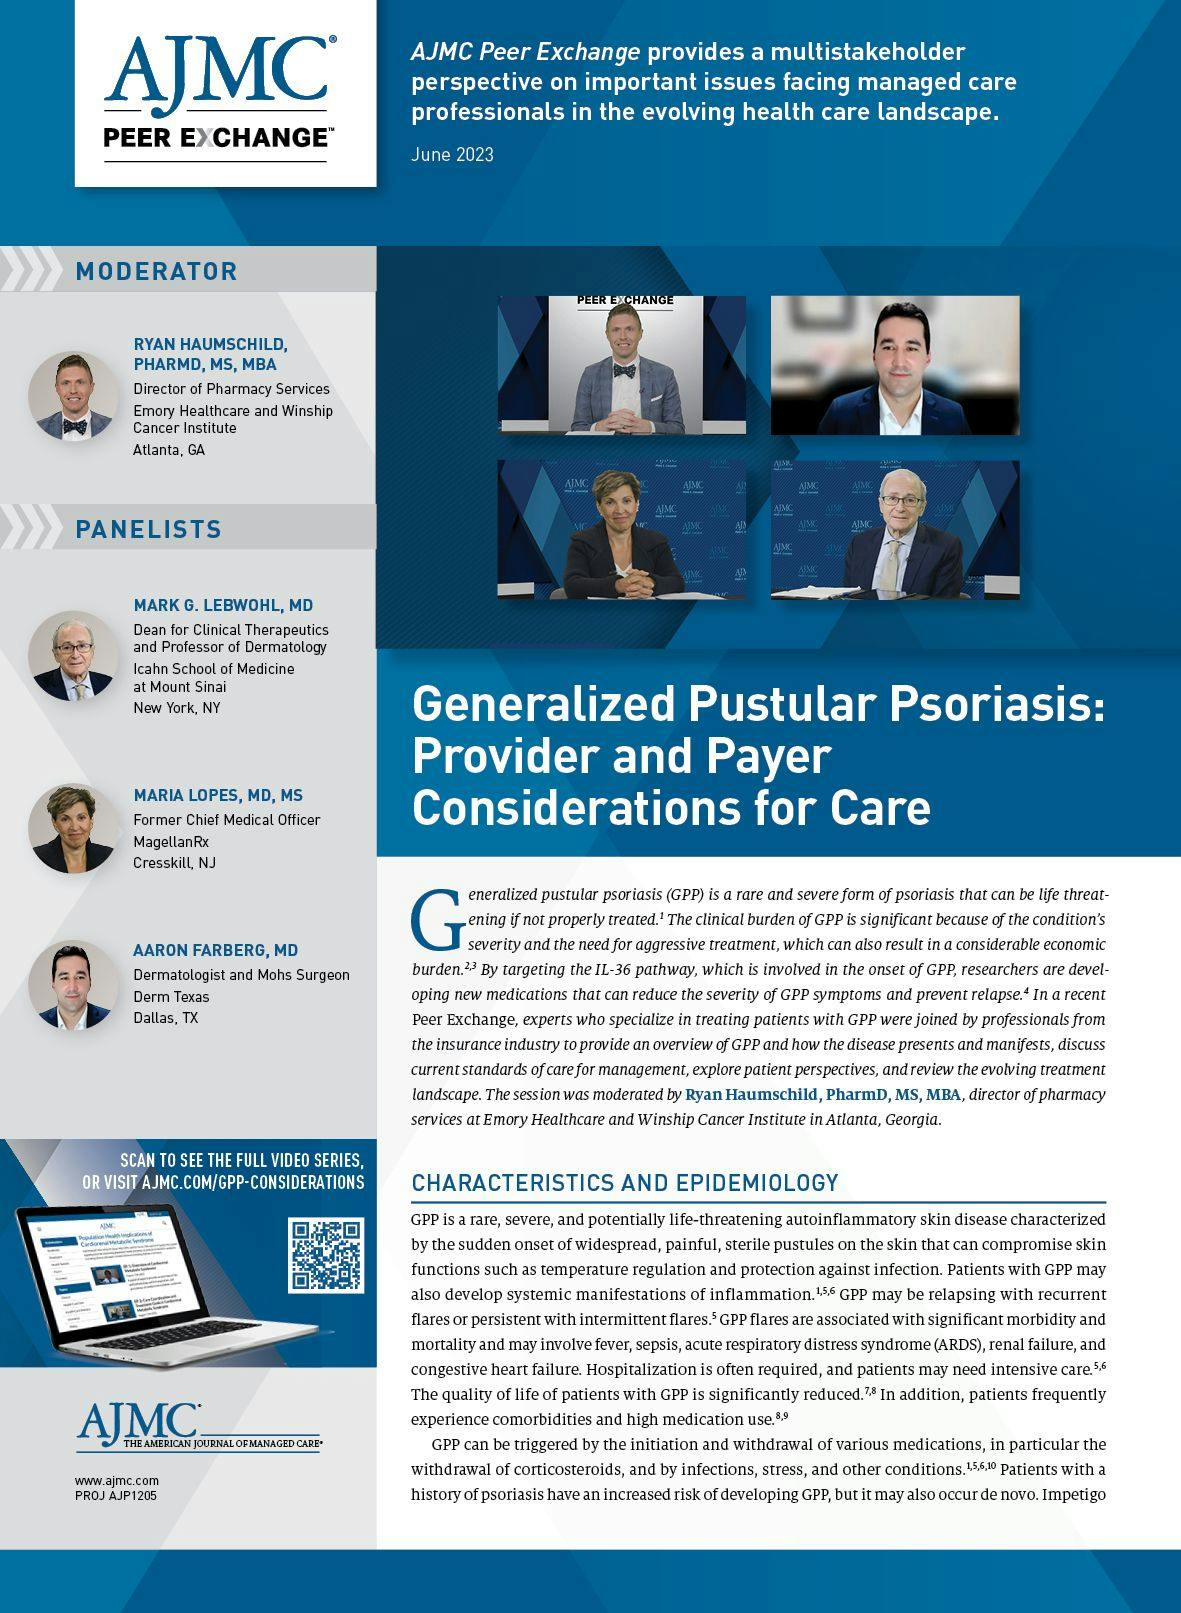 Generalized Pustular Psoriasis: Provider and Payer Considerations for Care